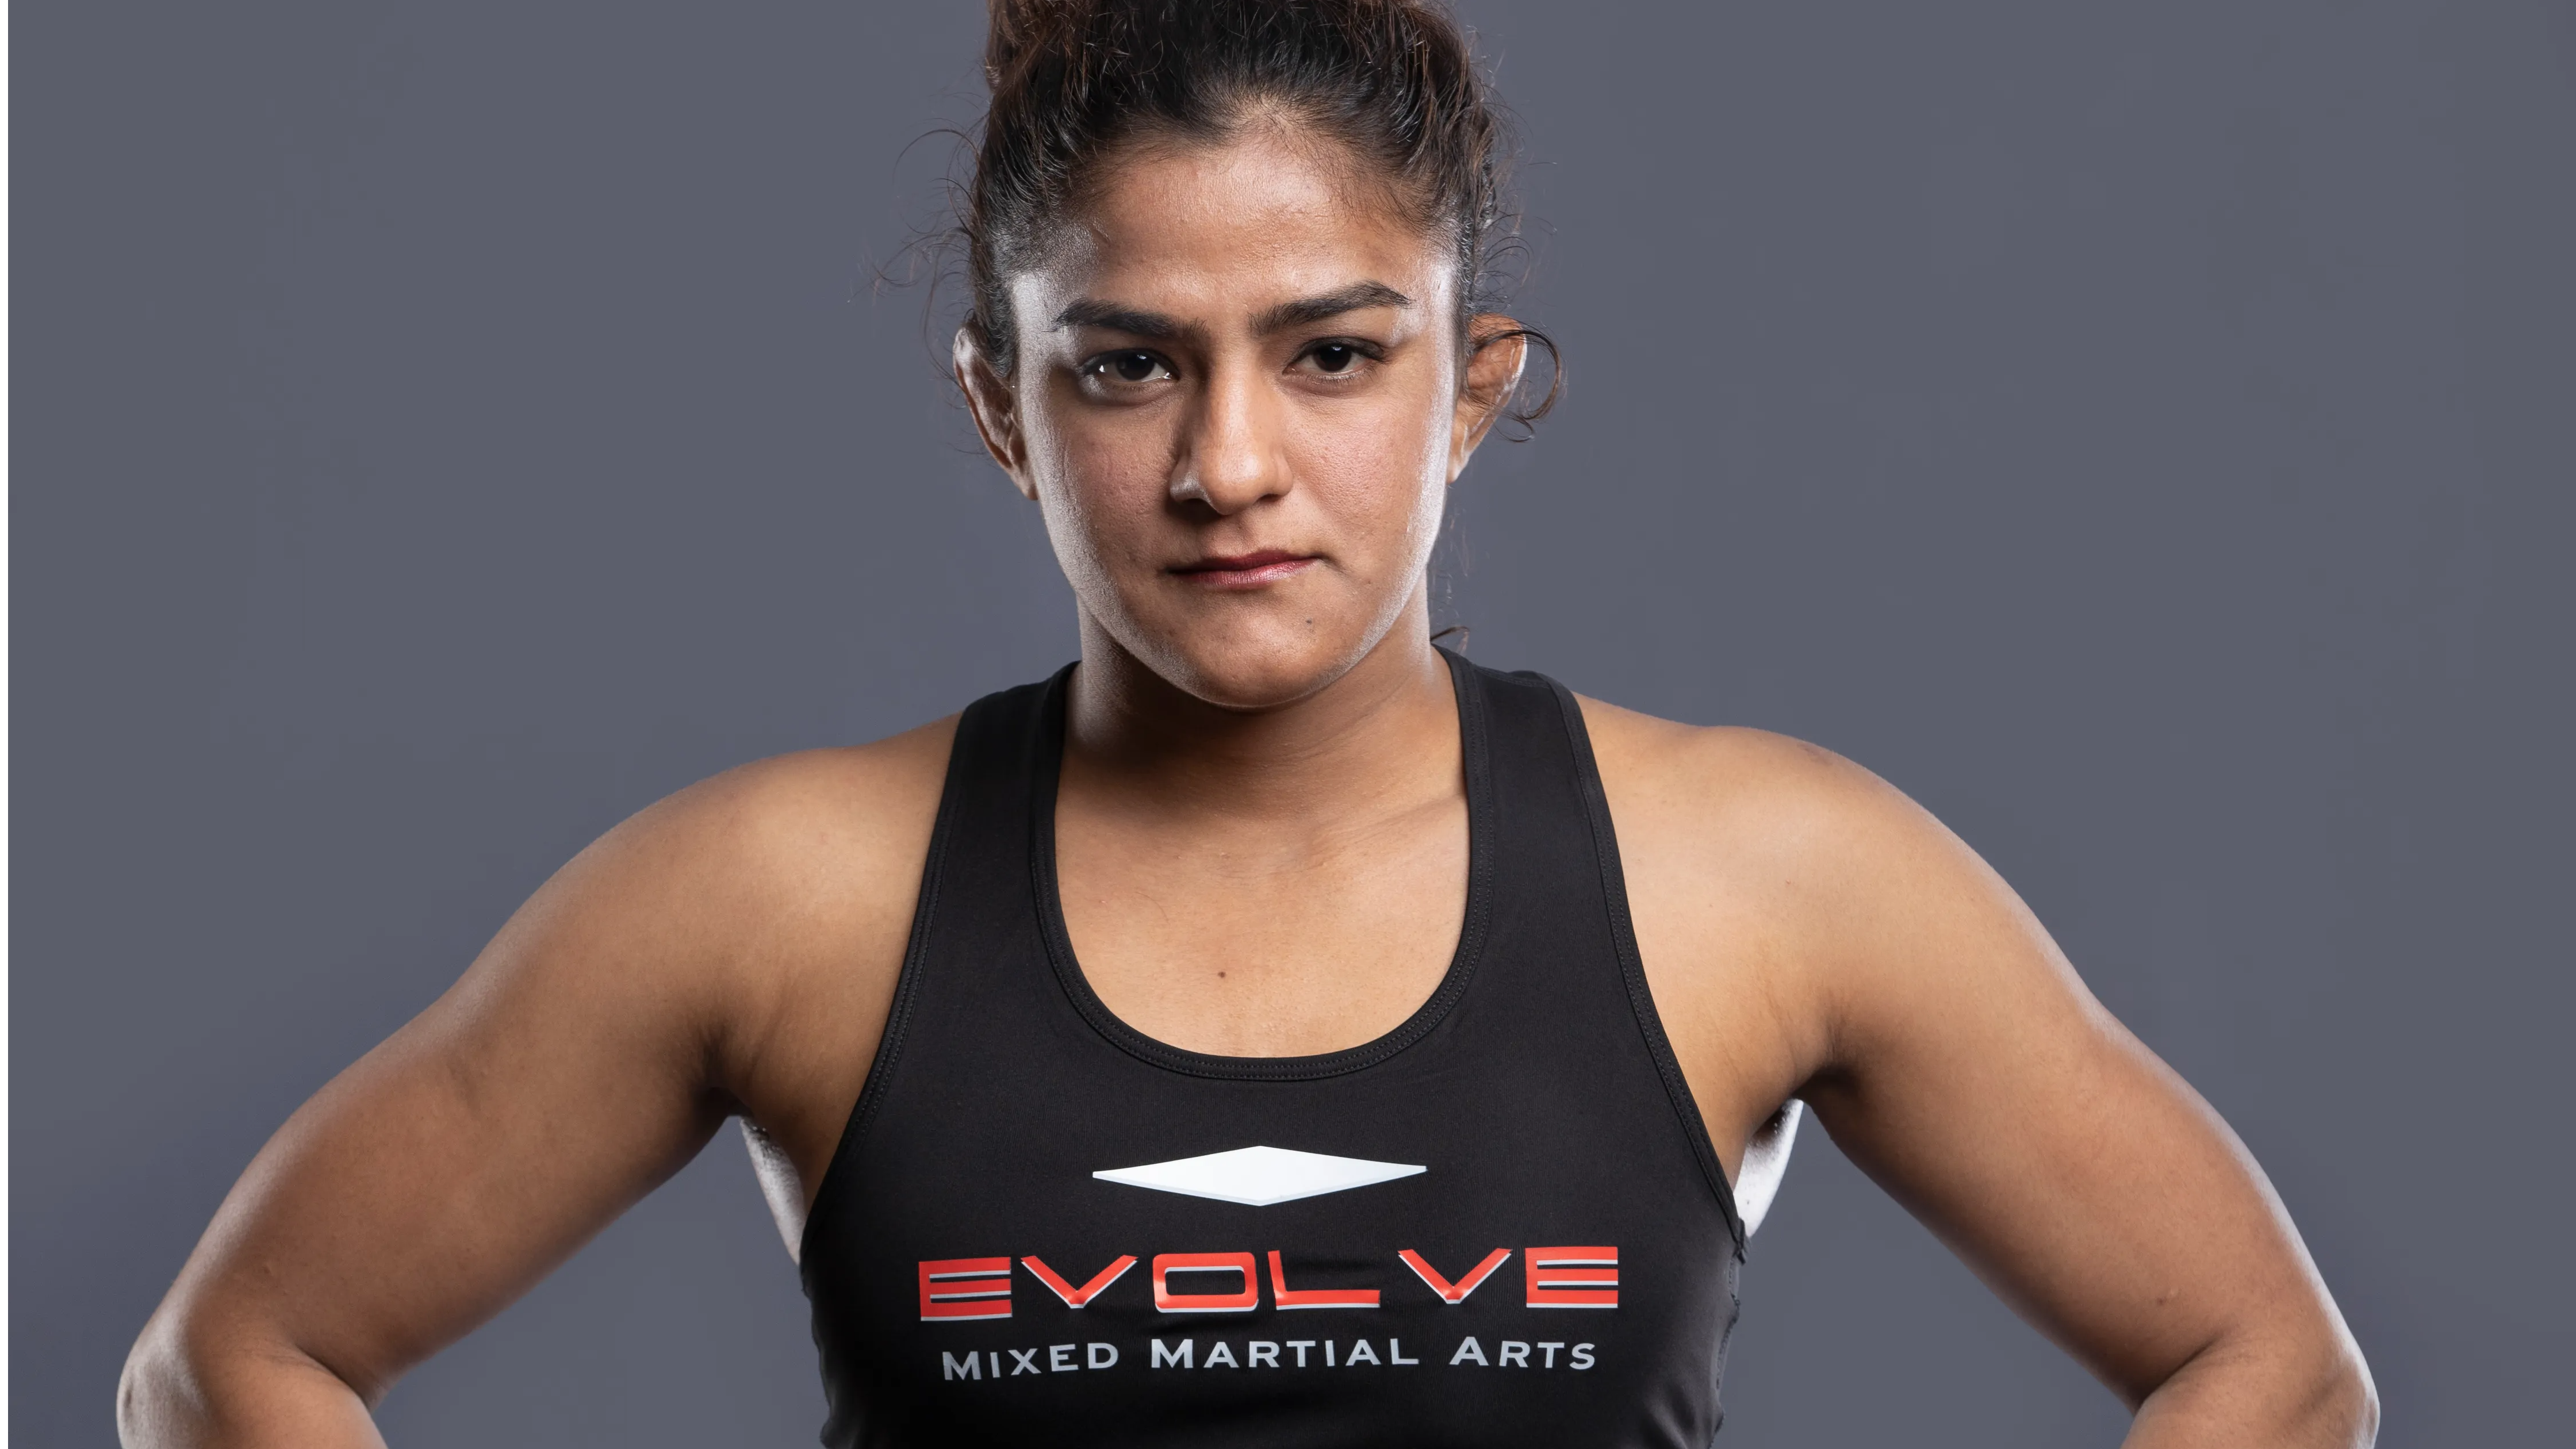 When polished, Indian wrestlers can grow a bigger pool of MMA athletes globally: Ritu Phogat